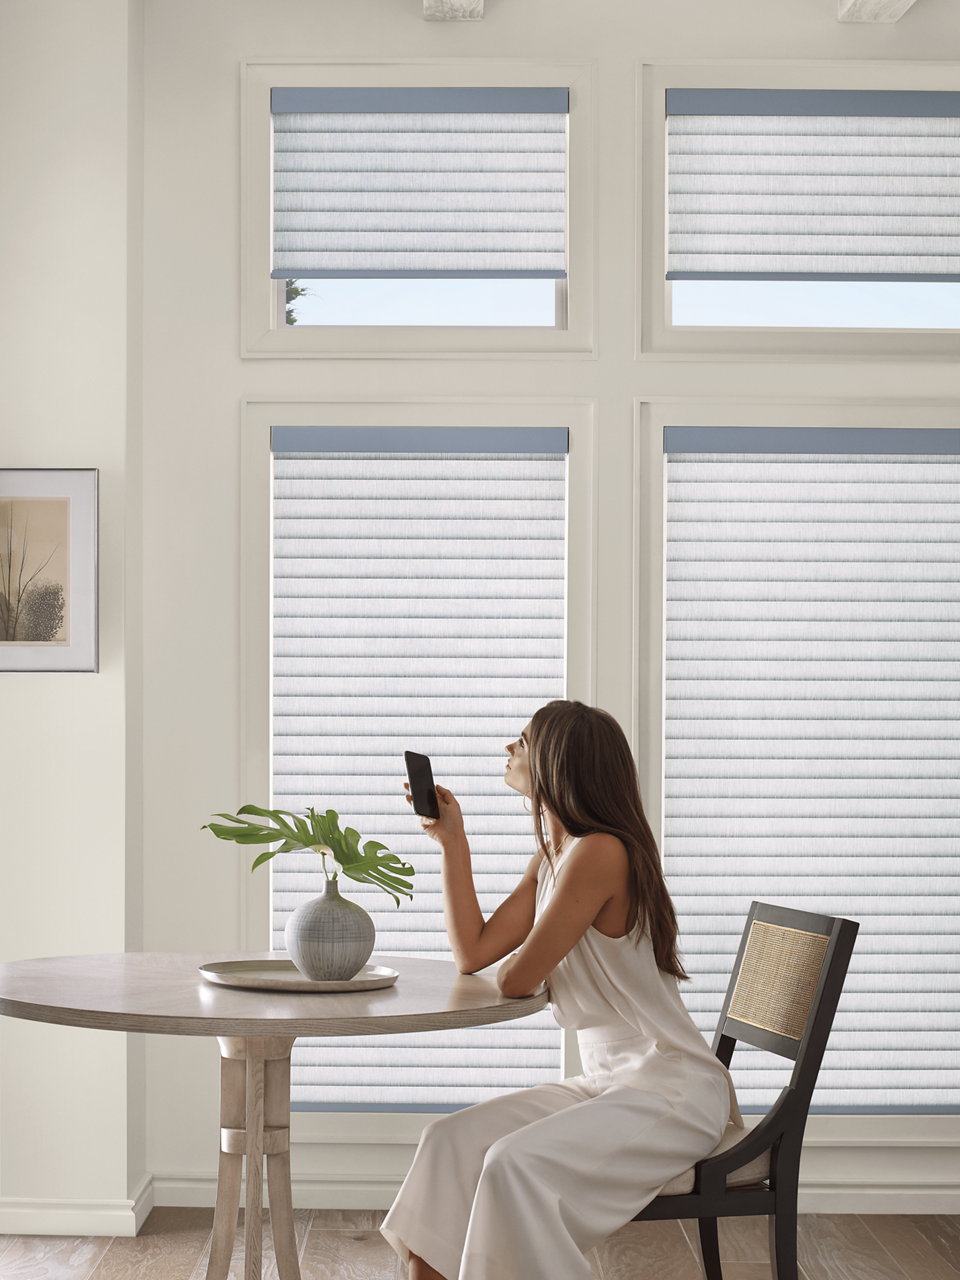 Woman operating her motorized blinds in a naturally lit dining room.